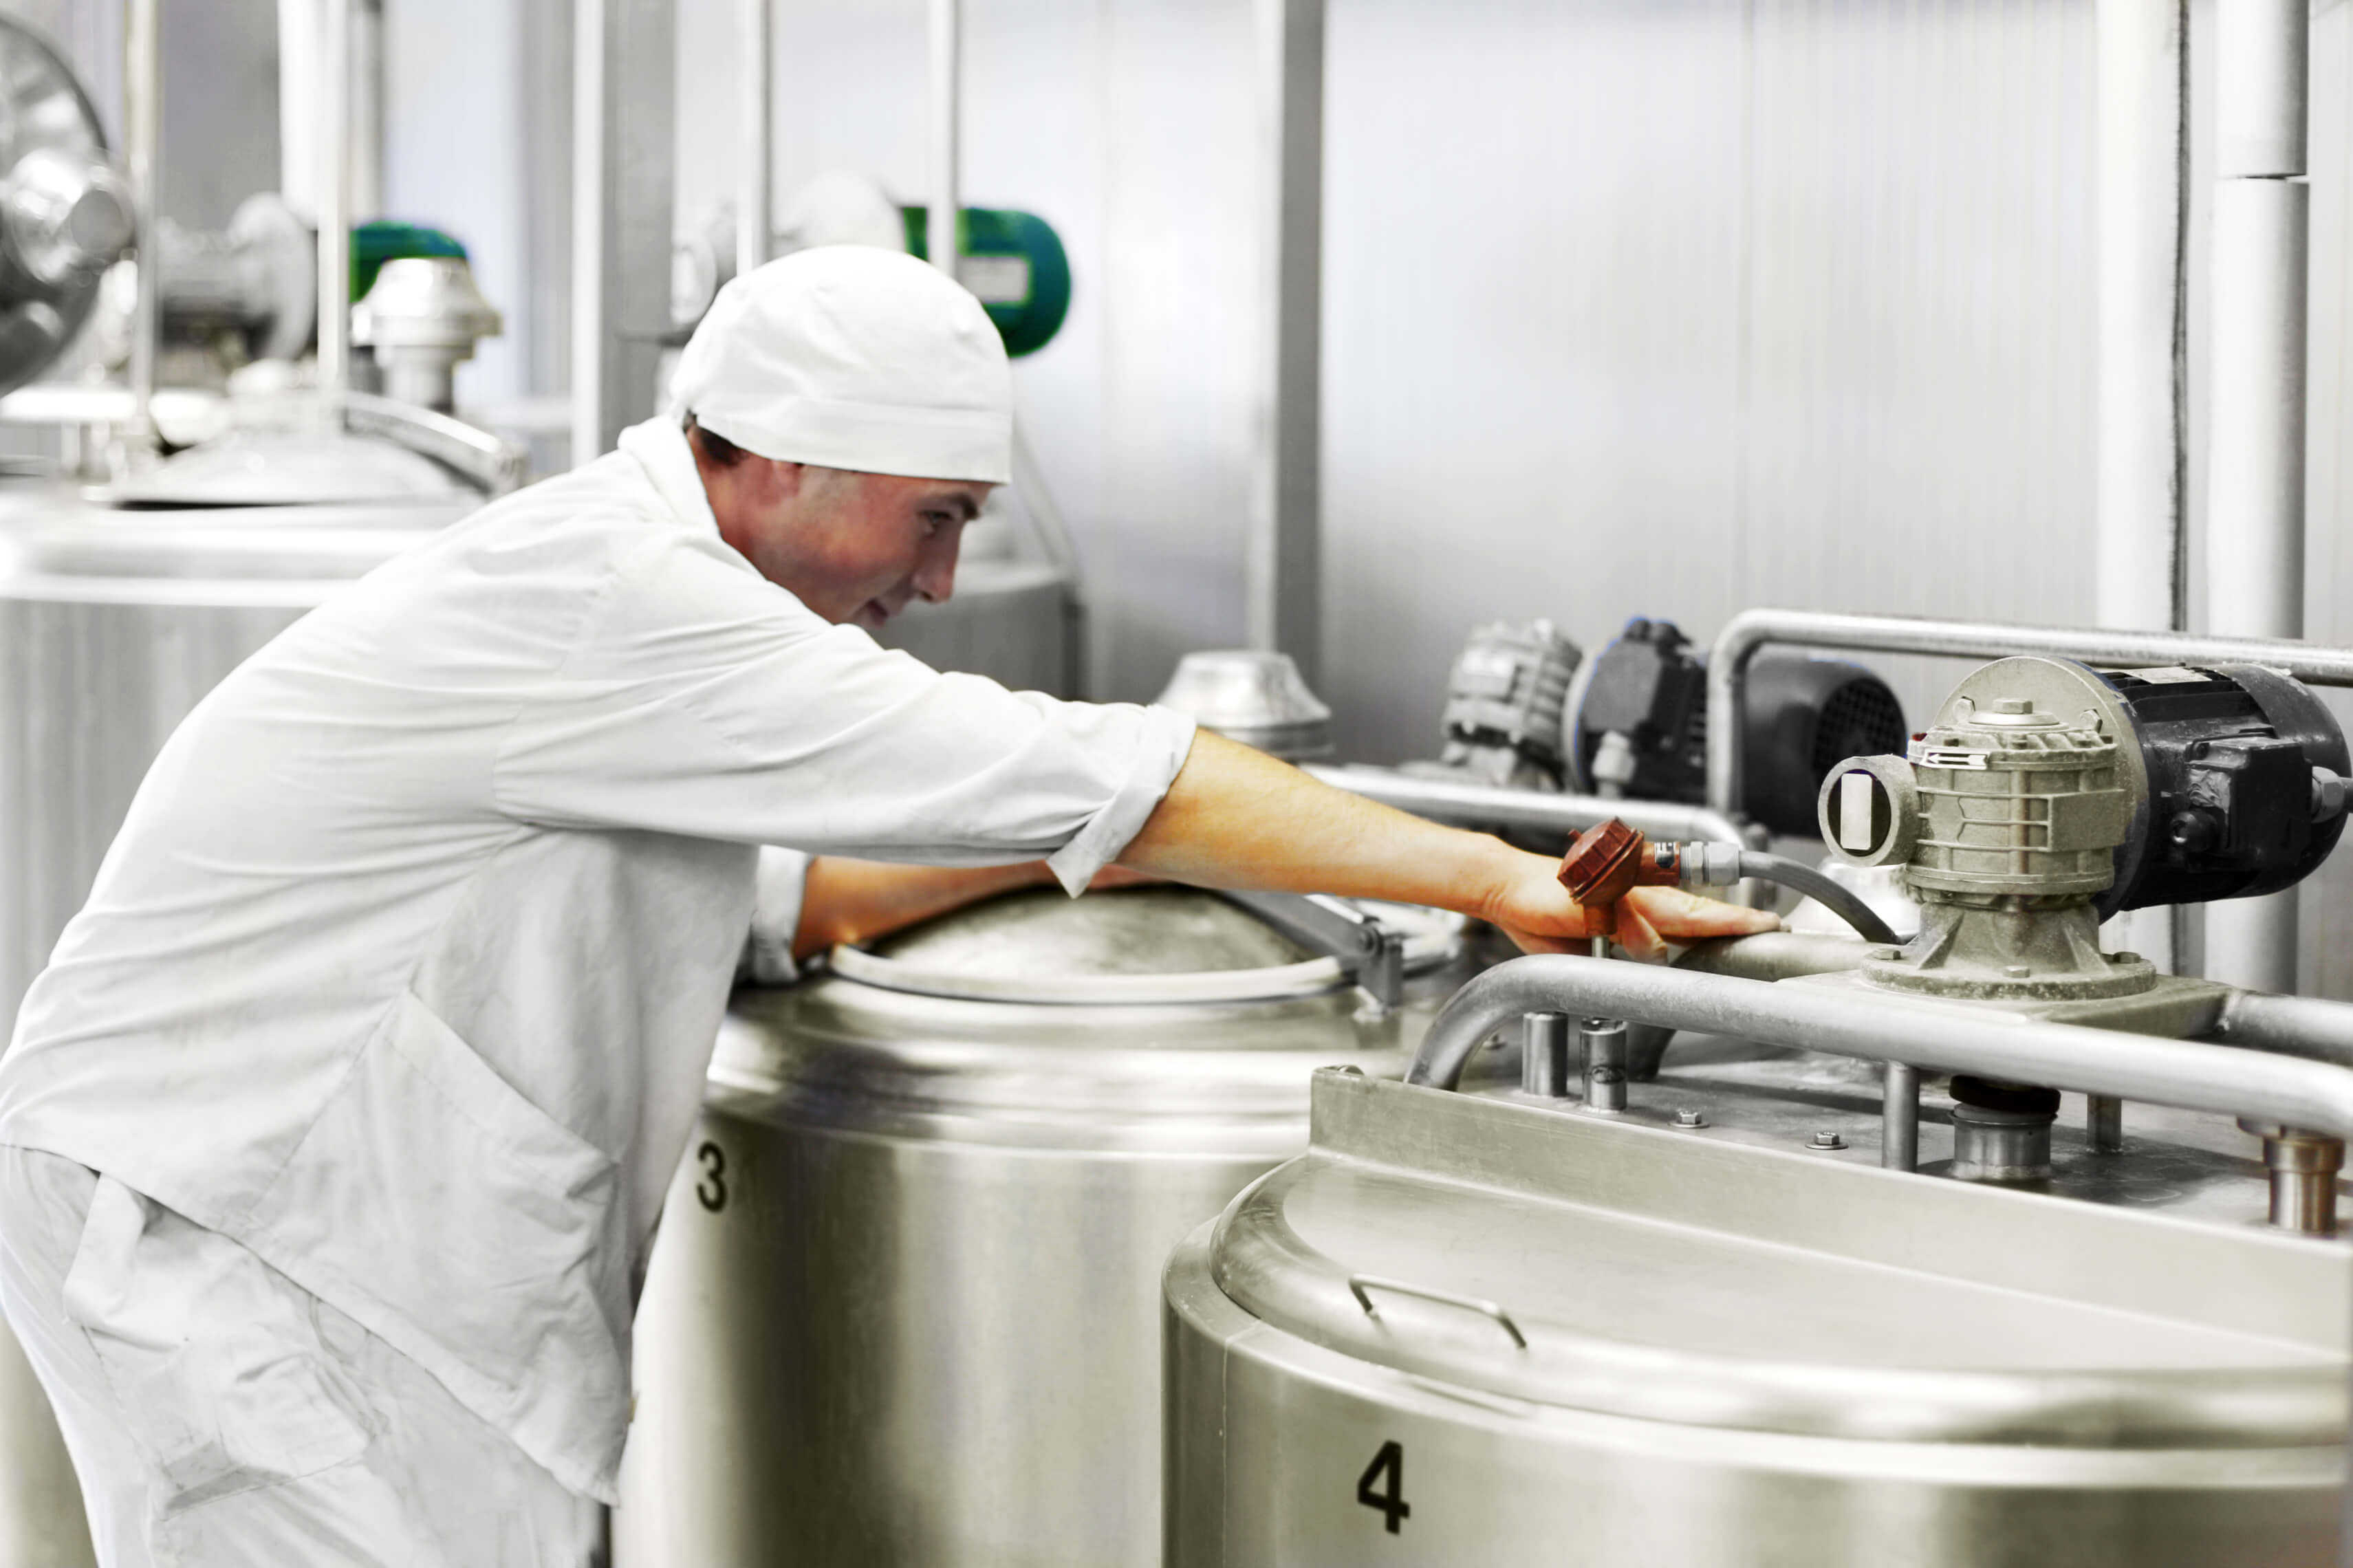 Danish suppliers in the Food Tech industry